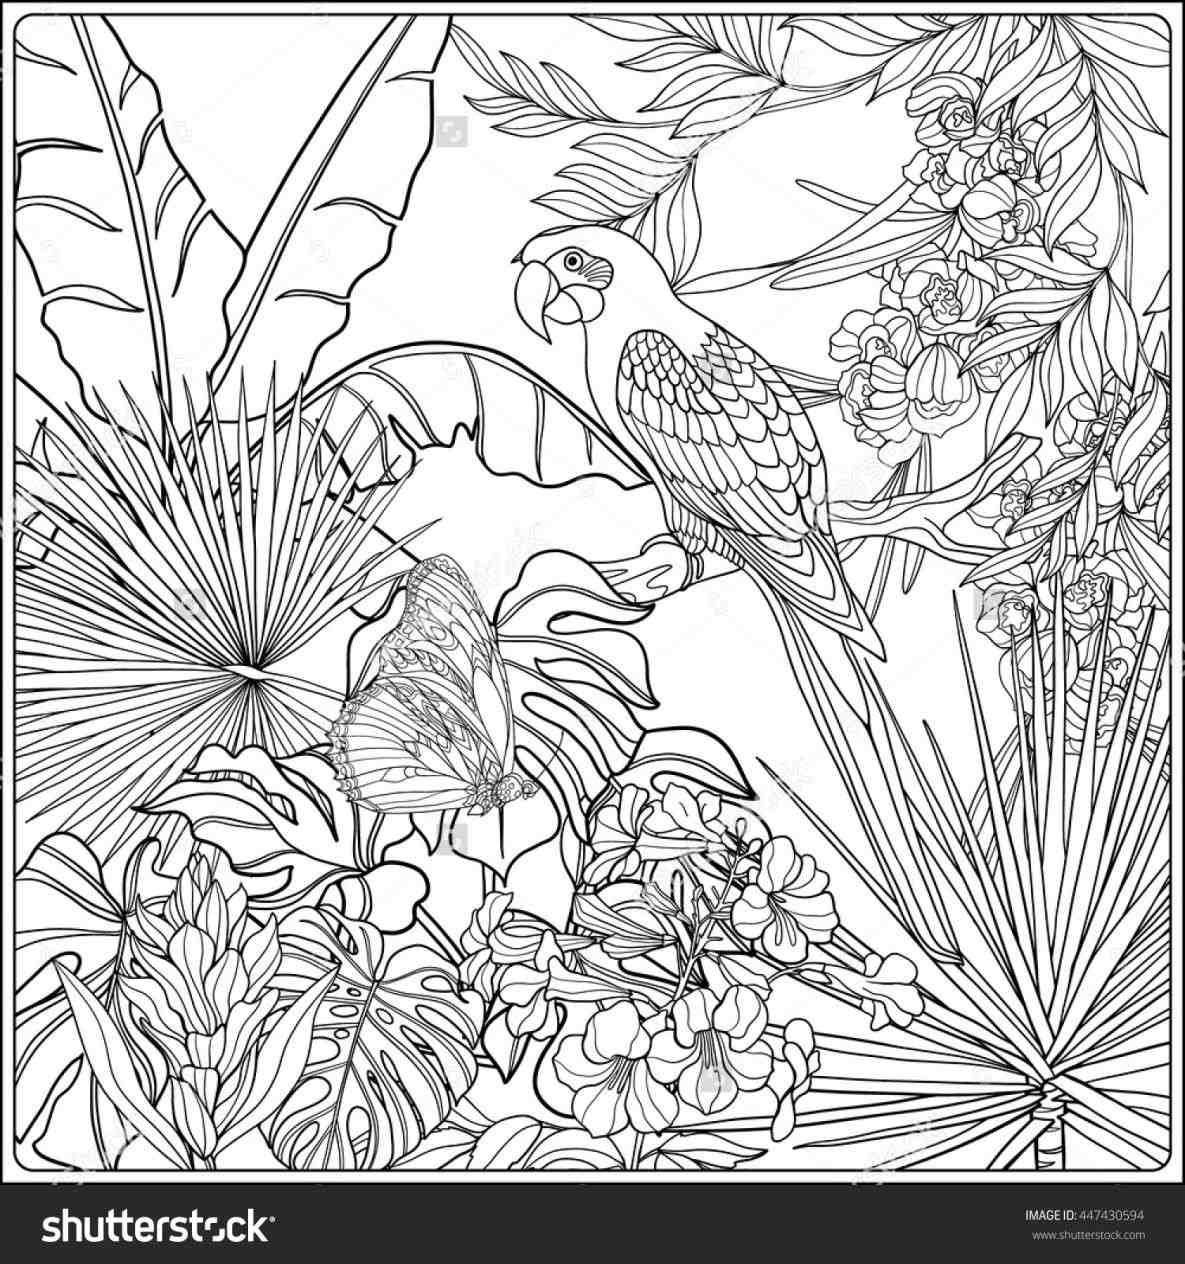 Jungle Coloring Pages For Adults at Free printable